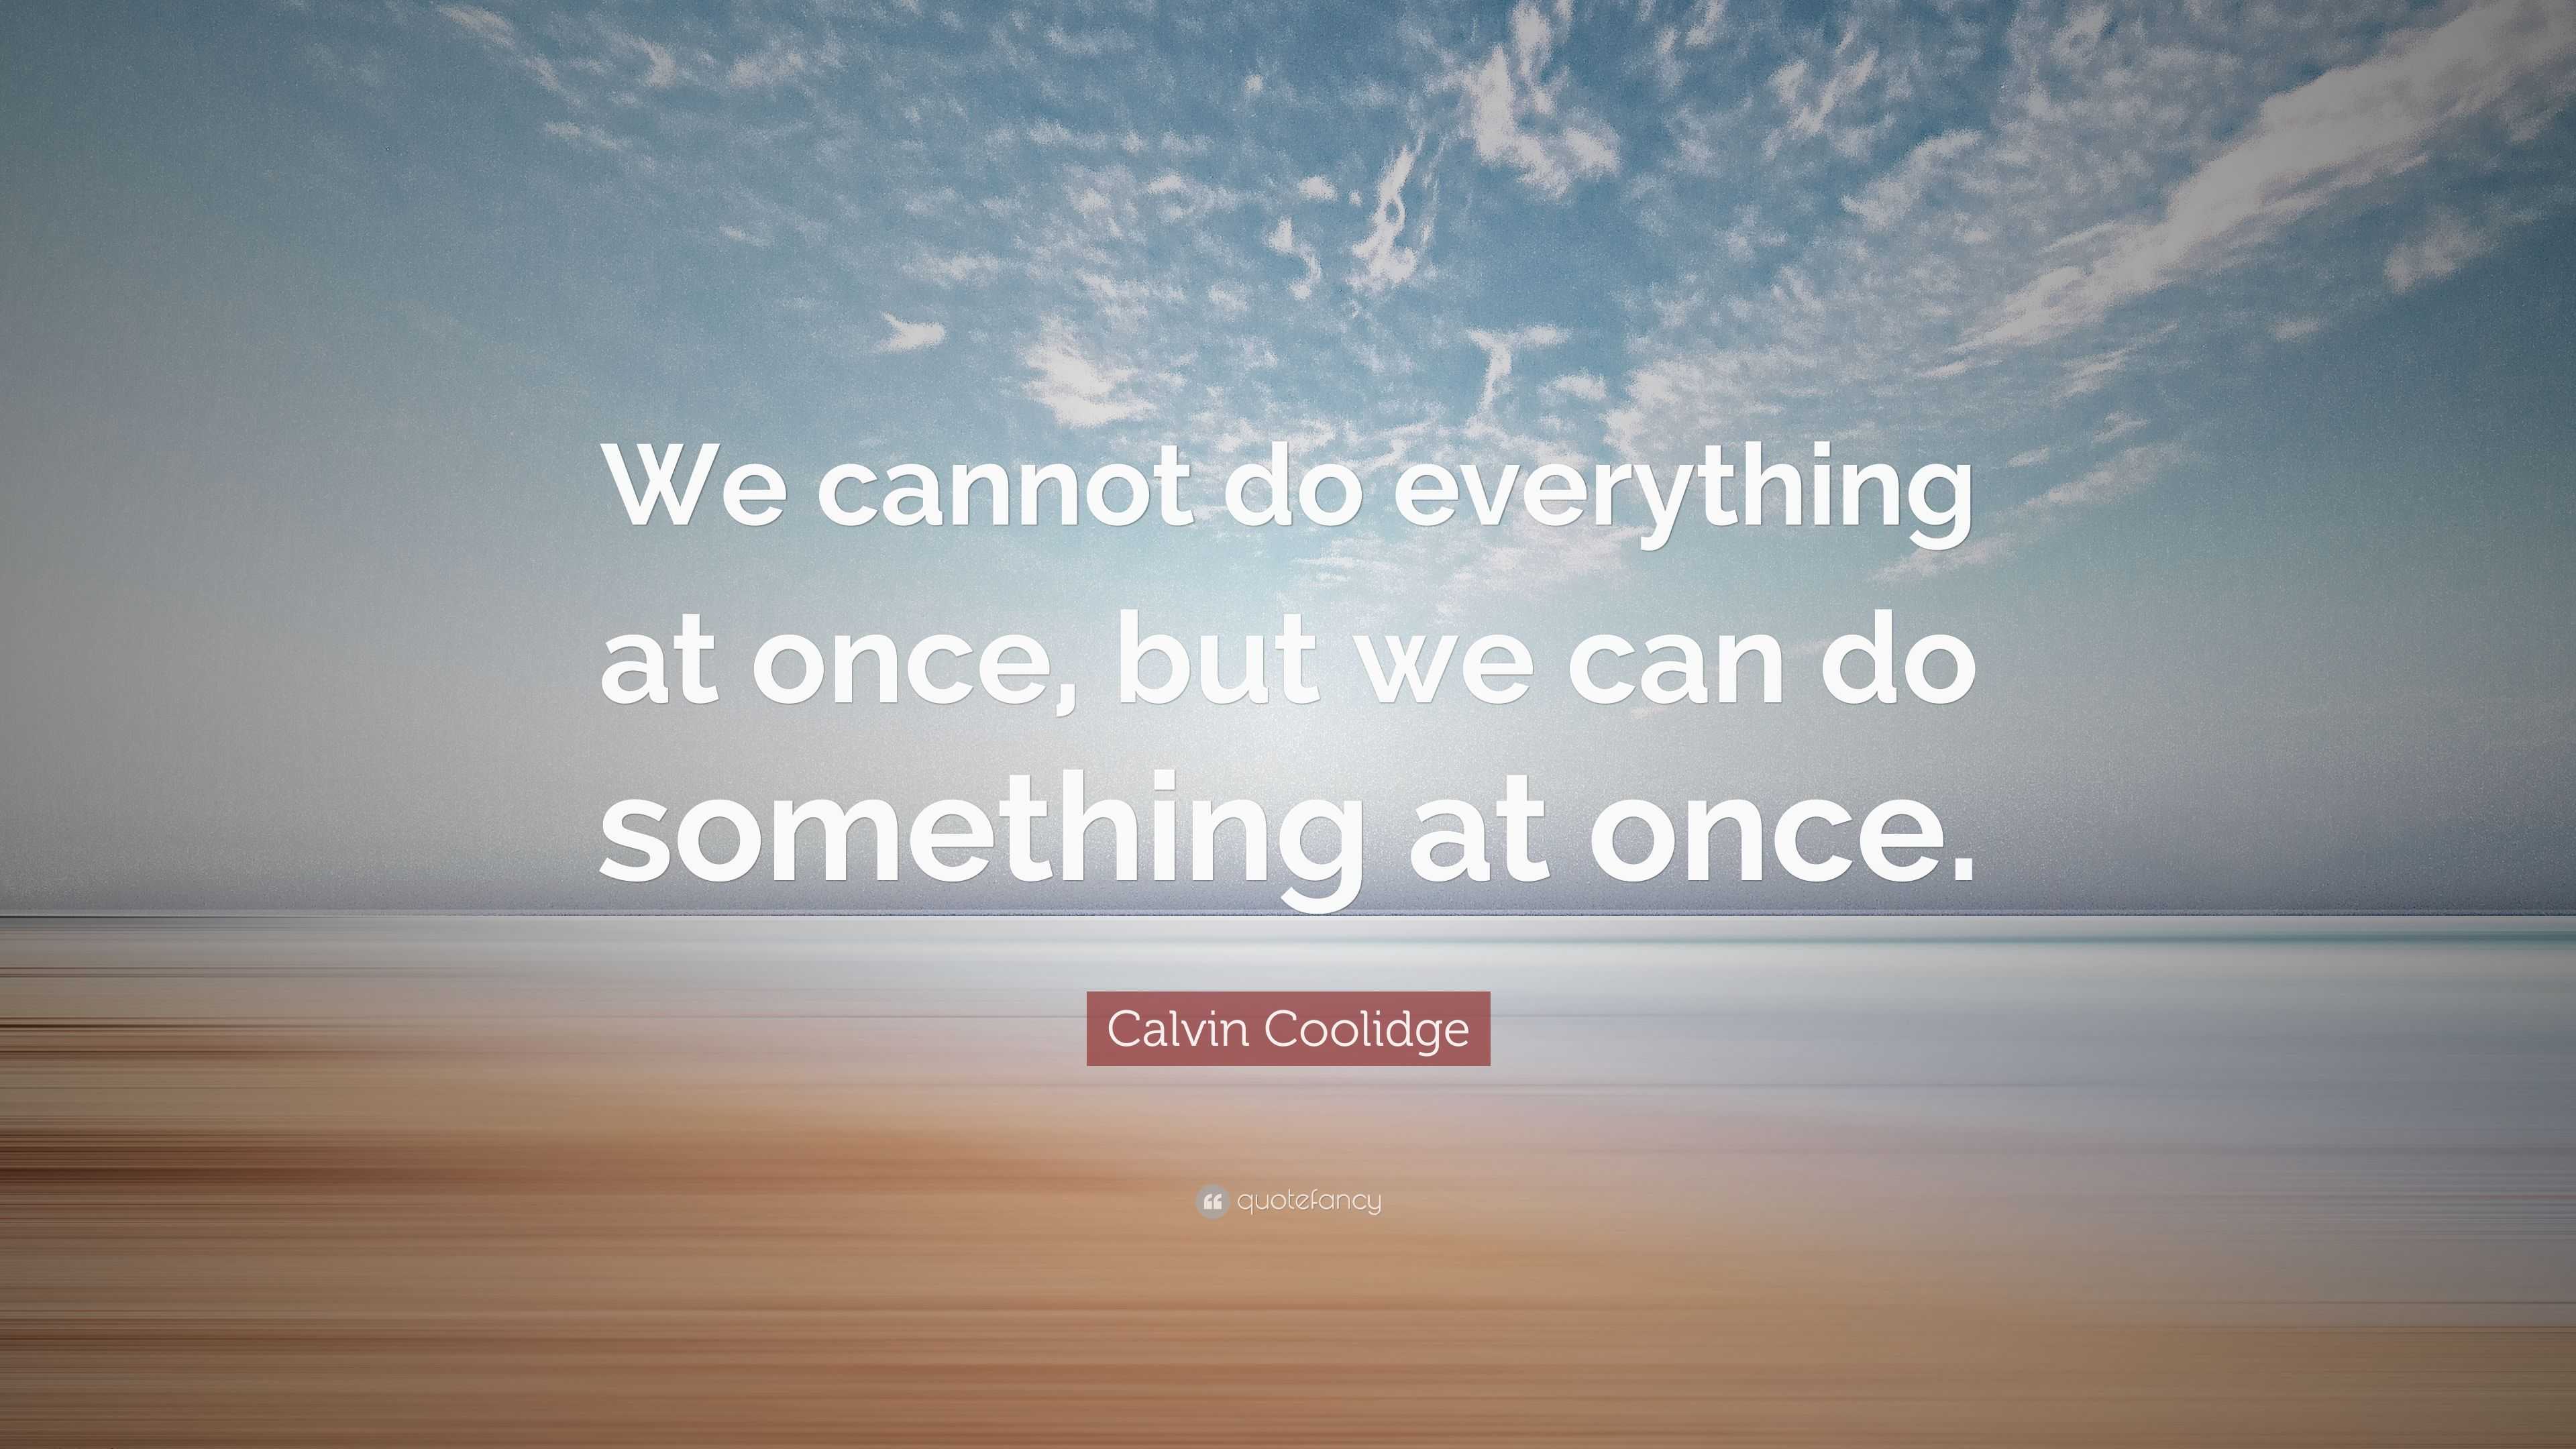 Calvin Coolidge Quote: “We cannot do everything at once, but we can do